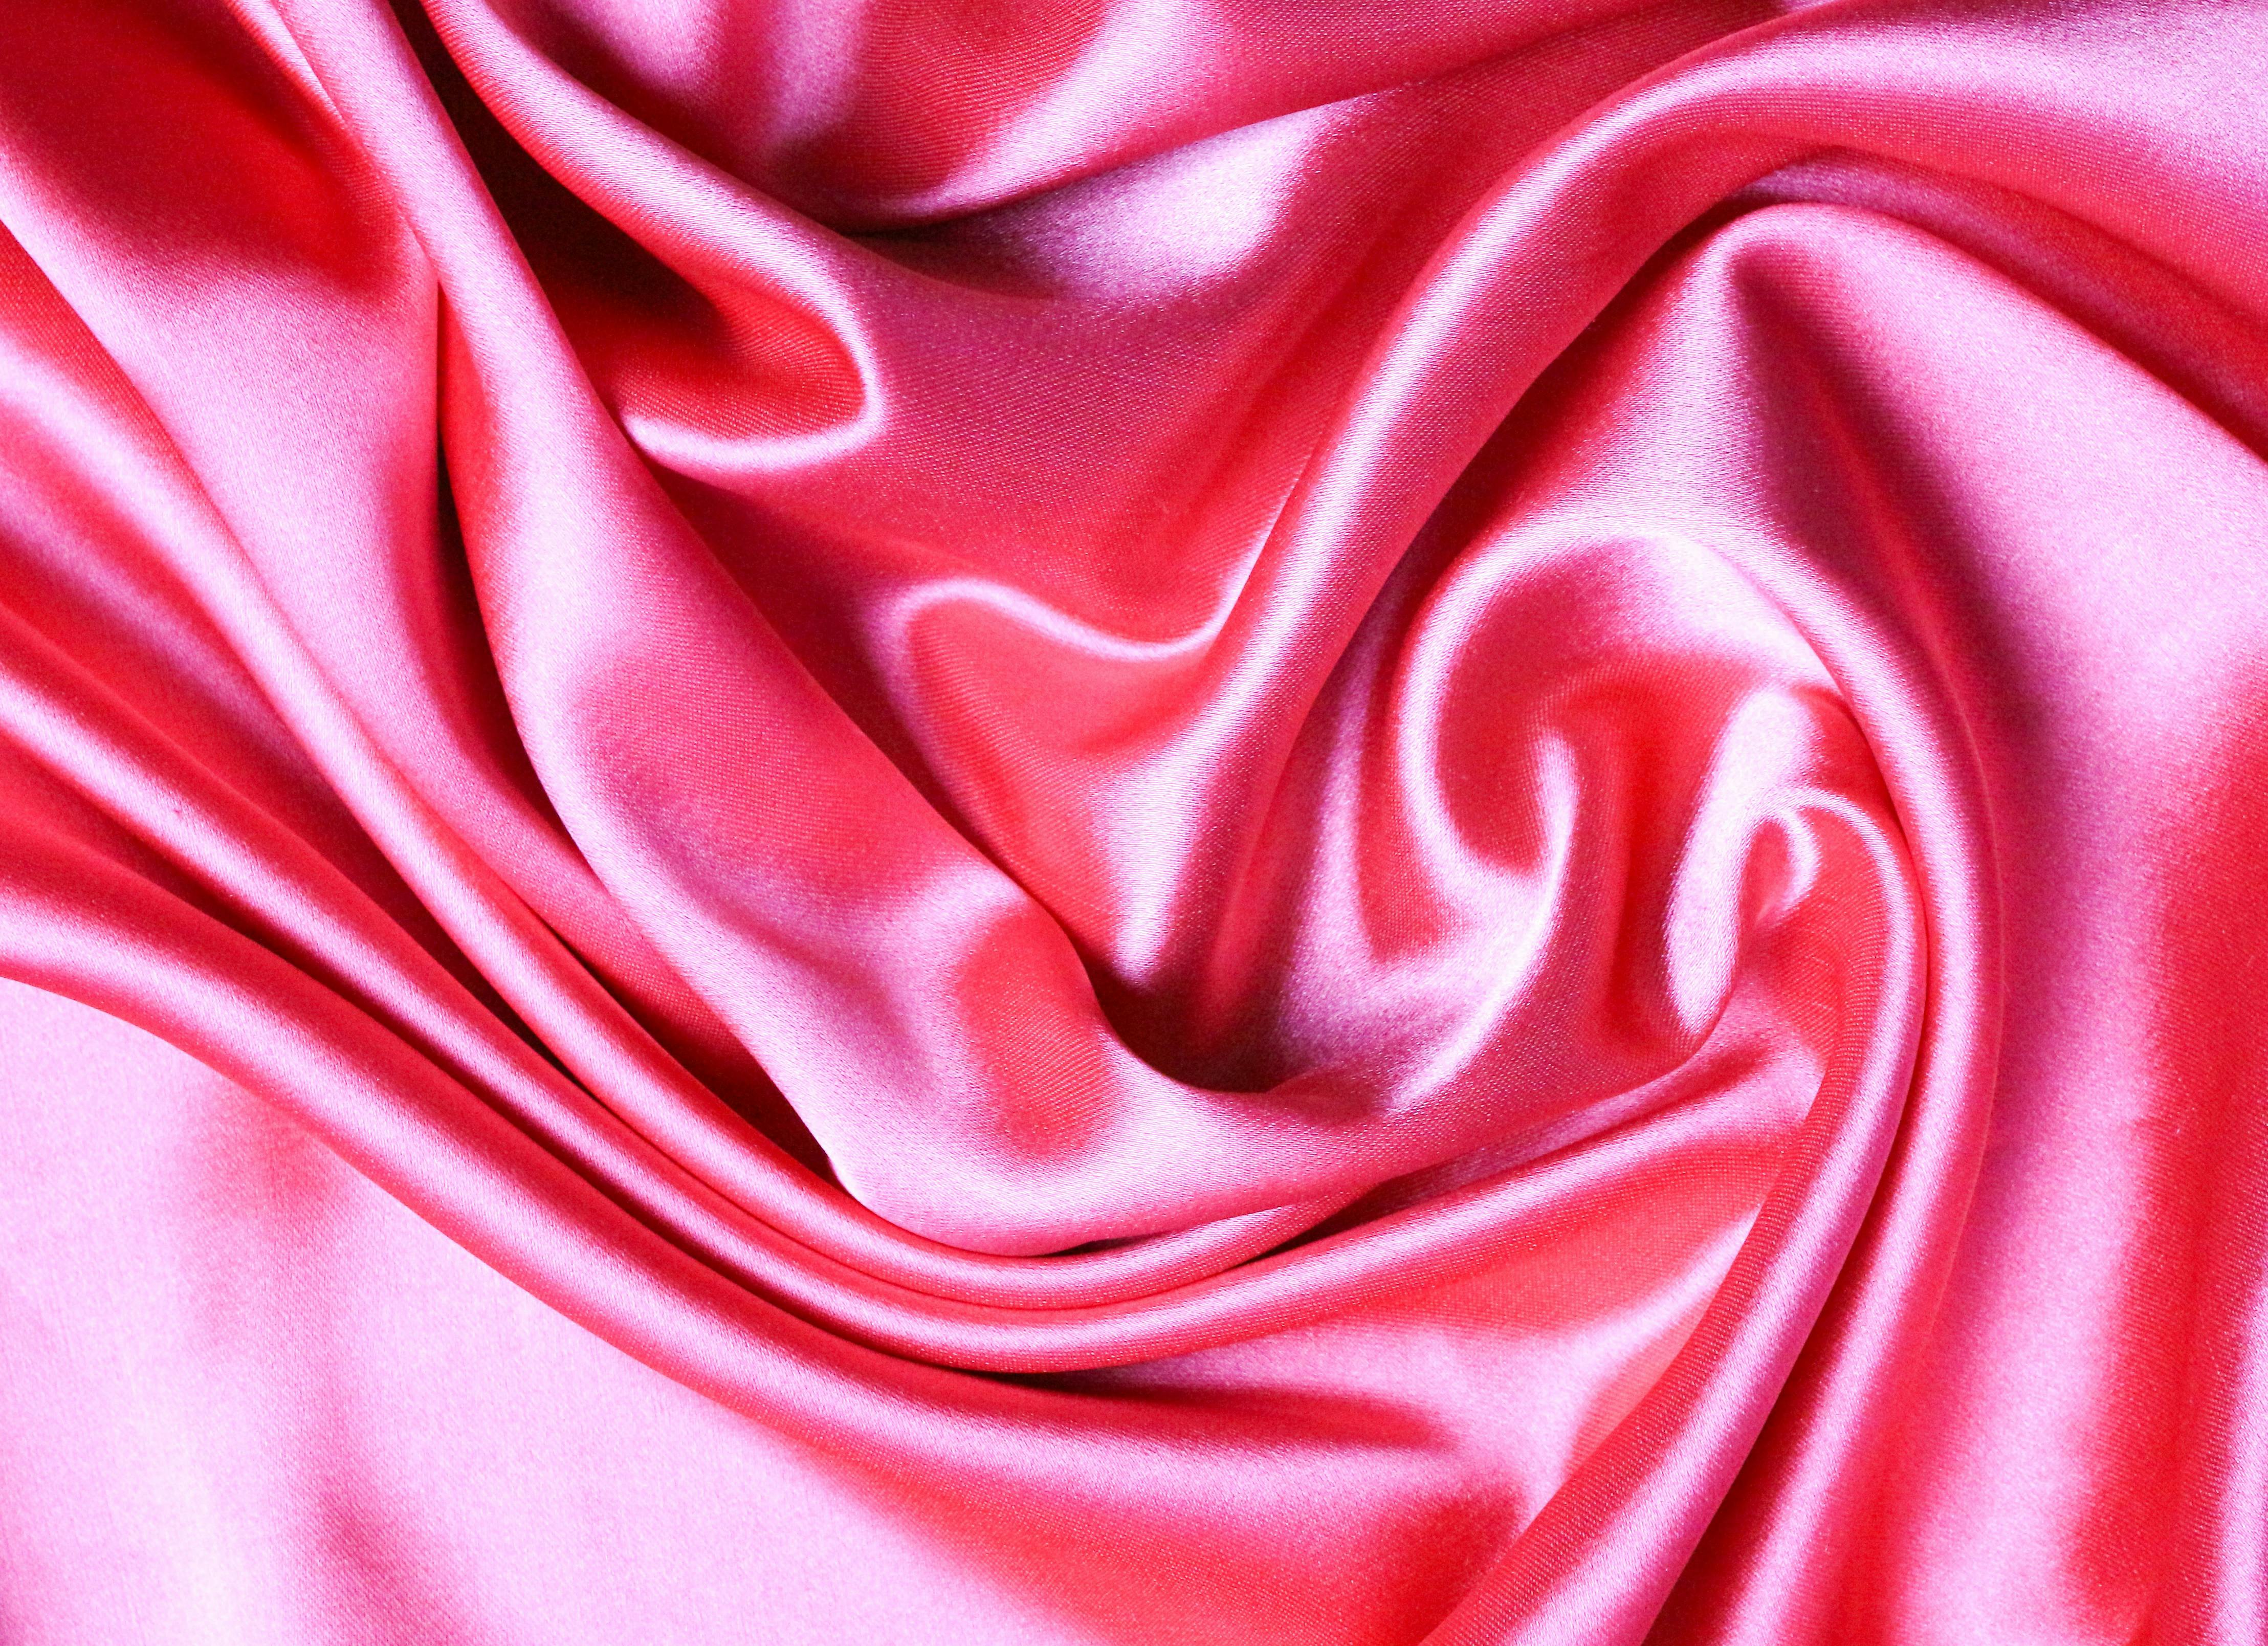 Pink Silk Pictures  Download Free Images on Unsplash